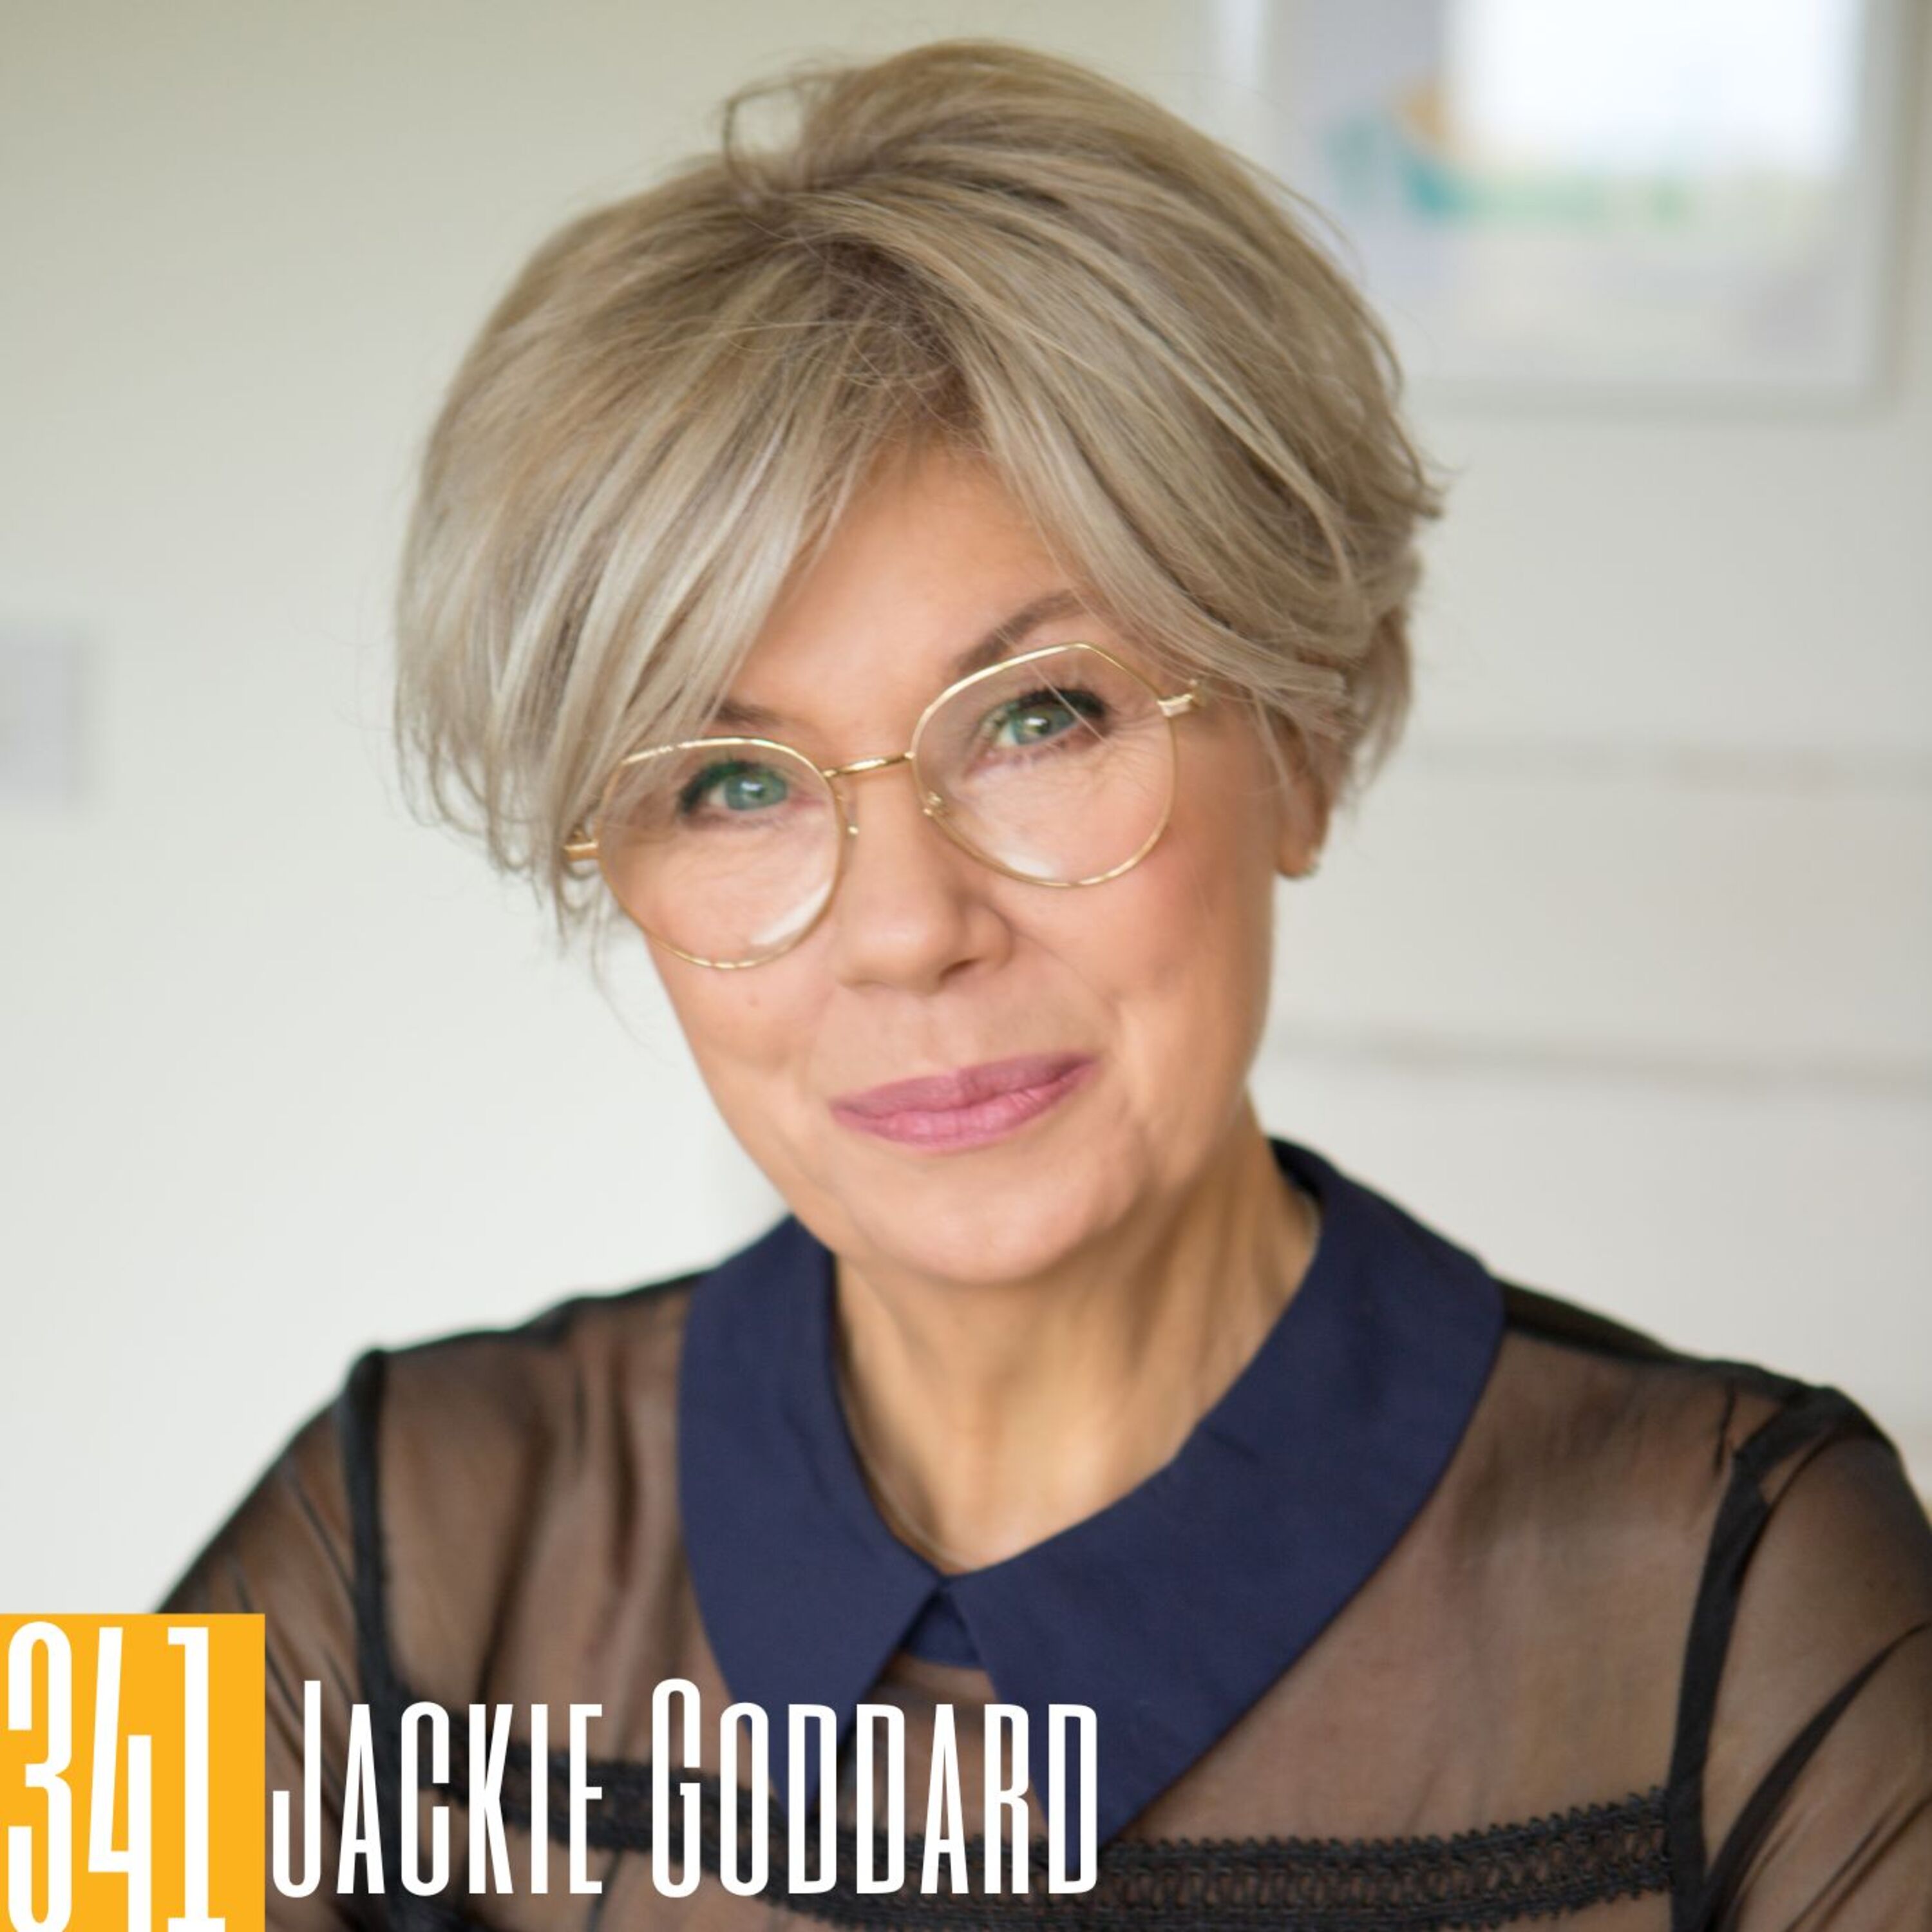 341 Jackie Goddard - From Fashion & Theatre to Empowering Others to Find Their Own Voice